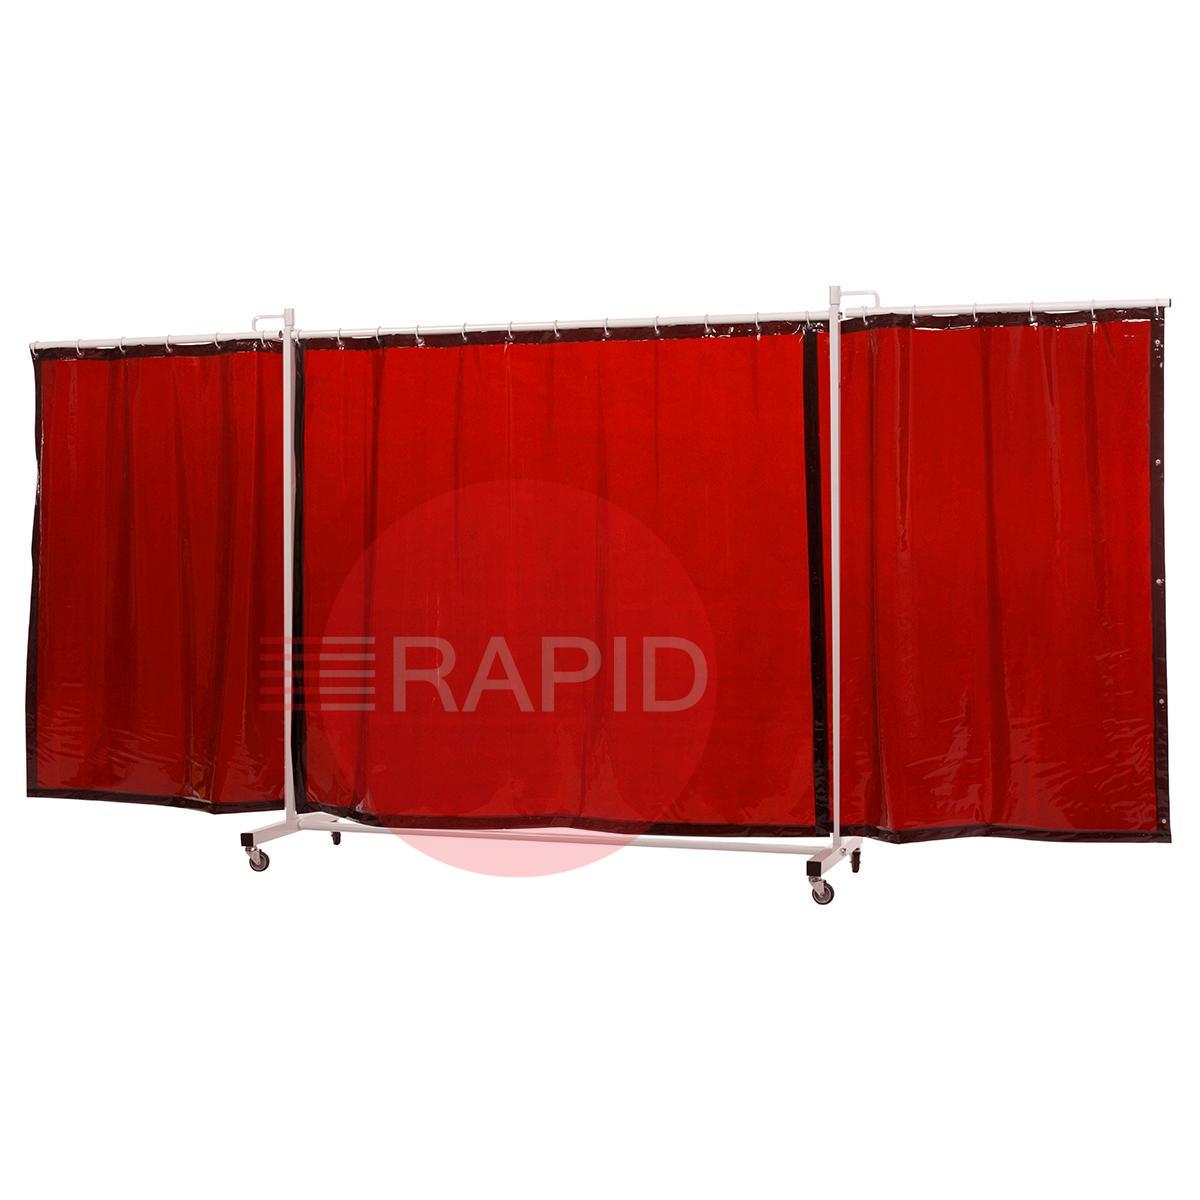 36.31.65  CEPRO Robusto XL Triptych Welding Screen with Orange-CE Curtain - 4.35m Wide x 2.1m High, Approved EN 25980